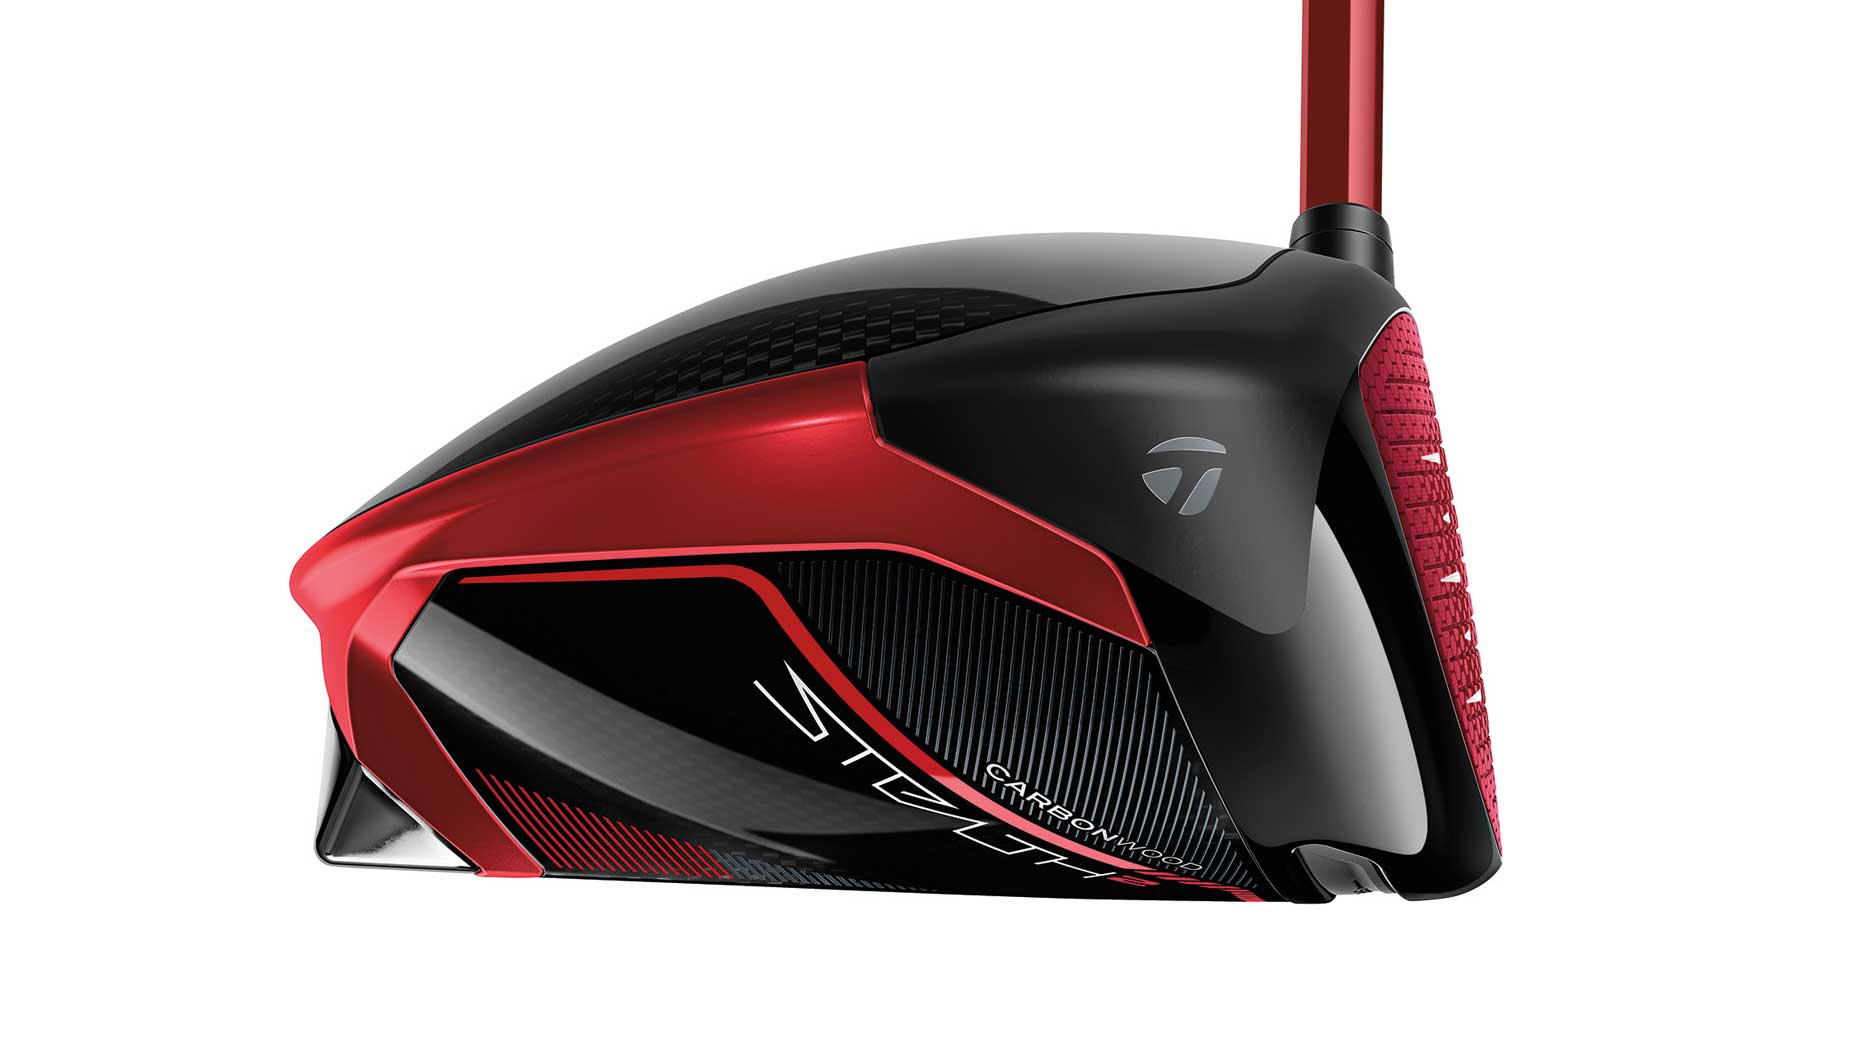 taylormade stealth 2 HD driver toe 1856